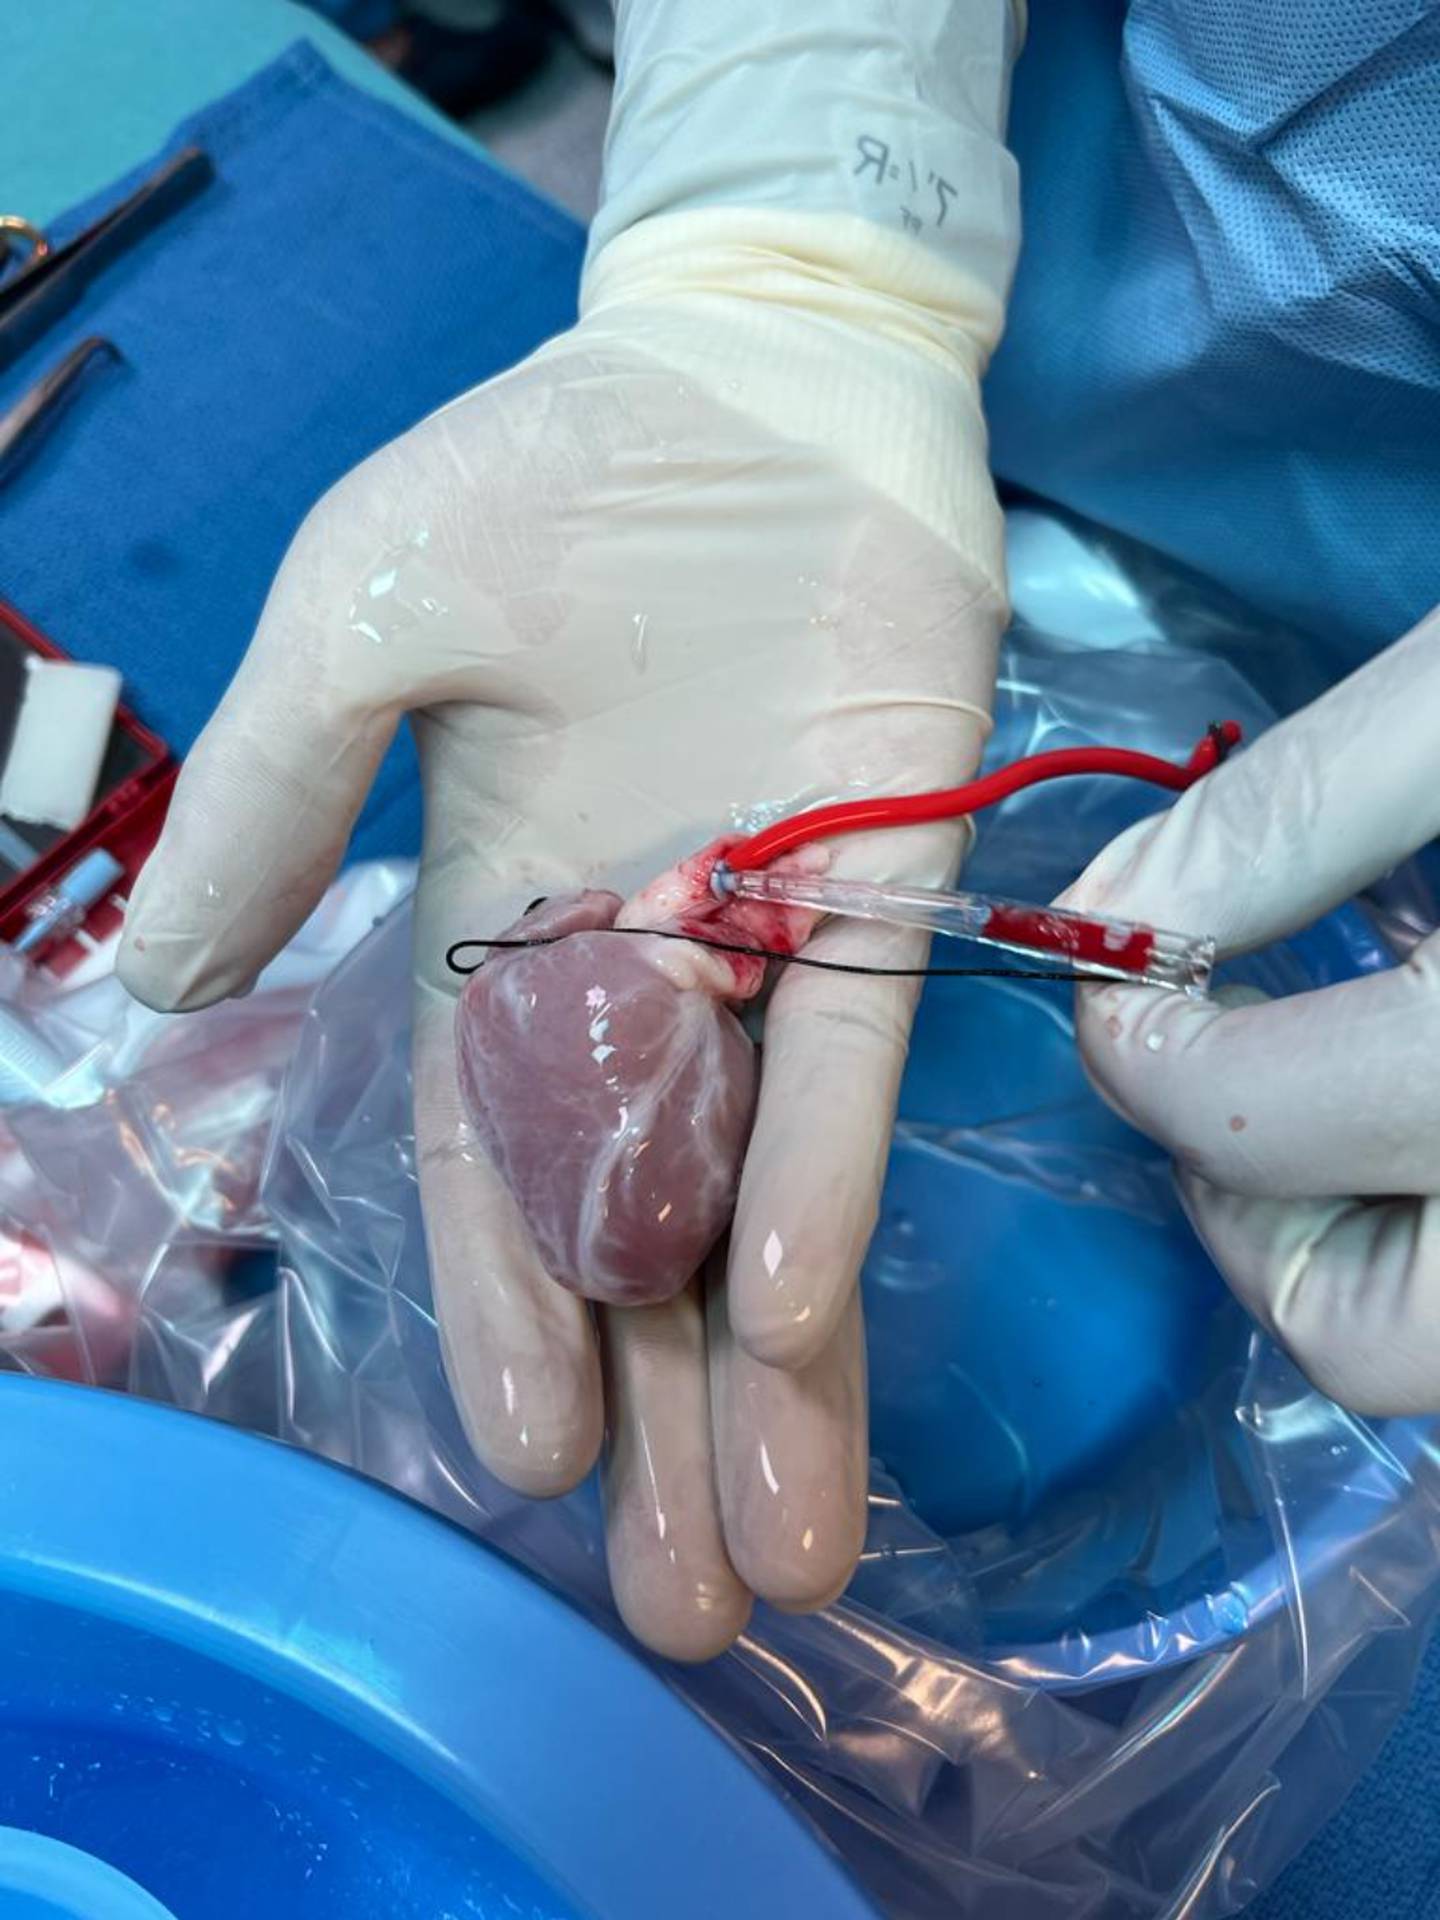 The heart from a baby who died in the UAE was transplanted into the Emirati infant. Photo: King Faisal Specialist Hospital and Research Centre